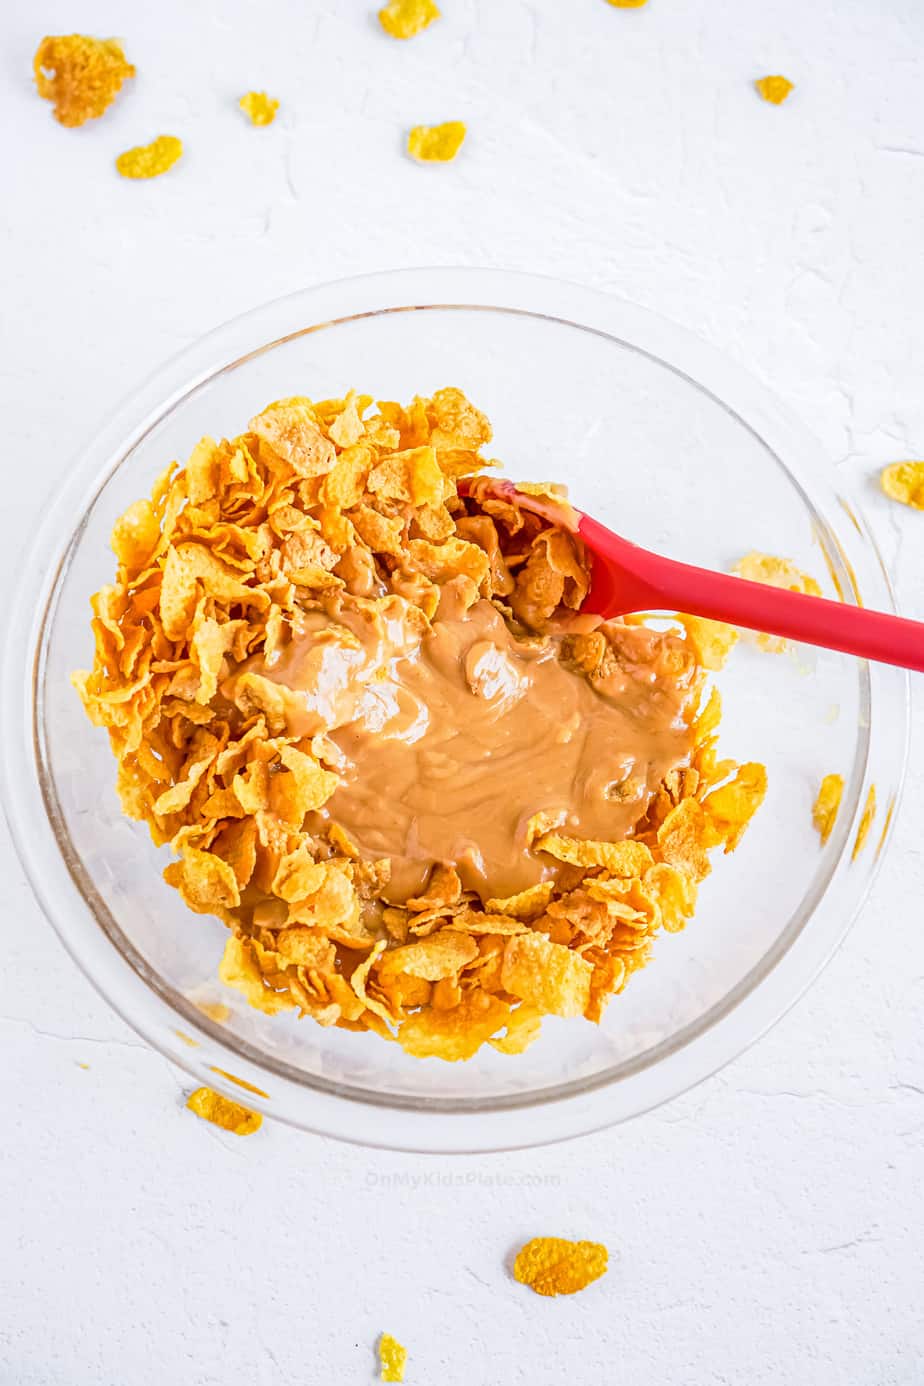 Cornflakes and peanut butter mixture mixing together in a bowl with a spatula